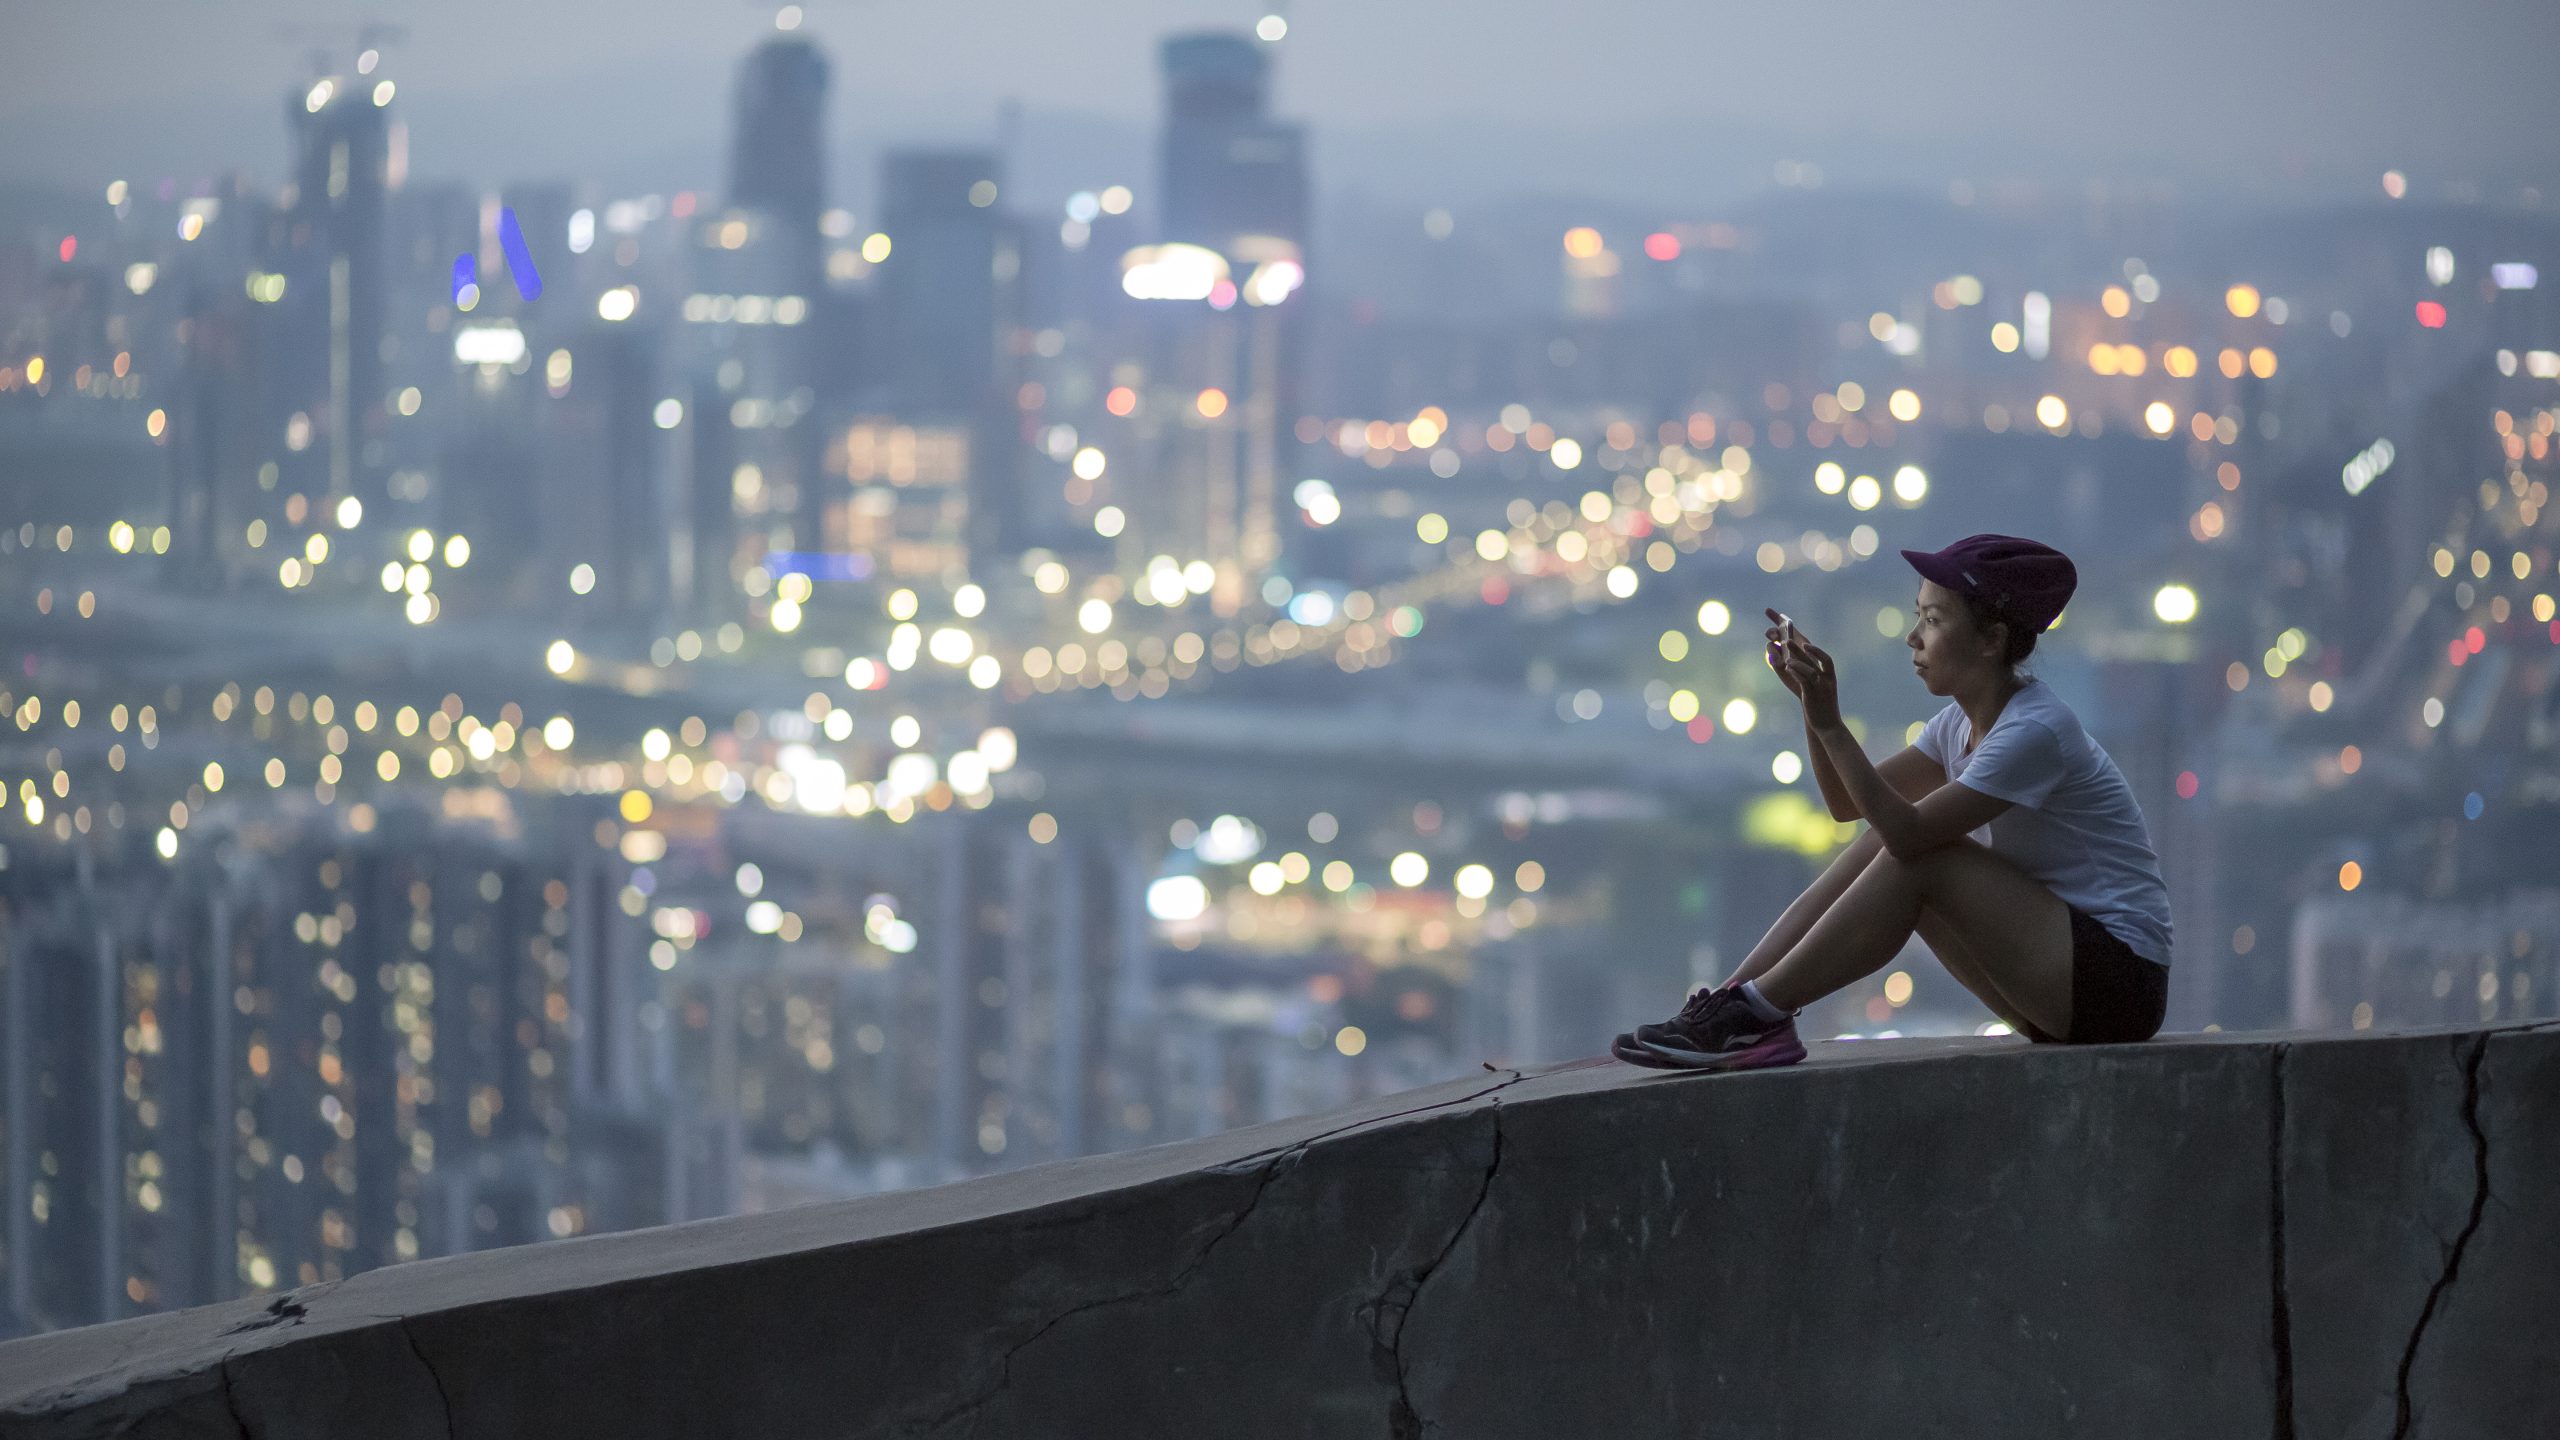 Young woman sitting on a hill in Shenzhen, China, the evening city lights behind her, holding a smartphone. Photographer Tuomas Harjumaaskola.